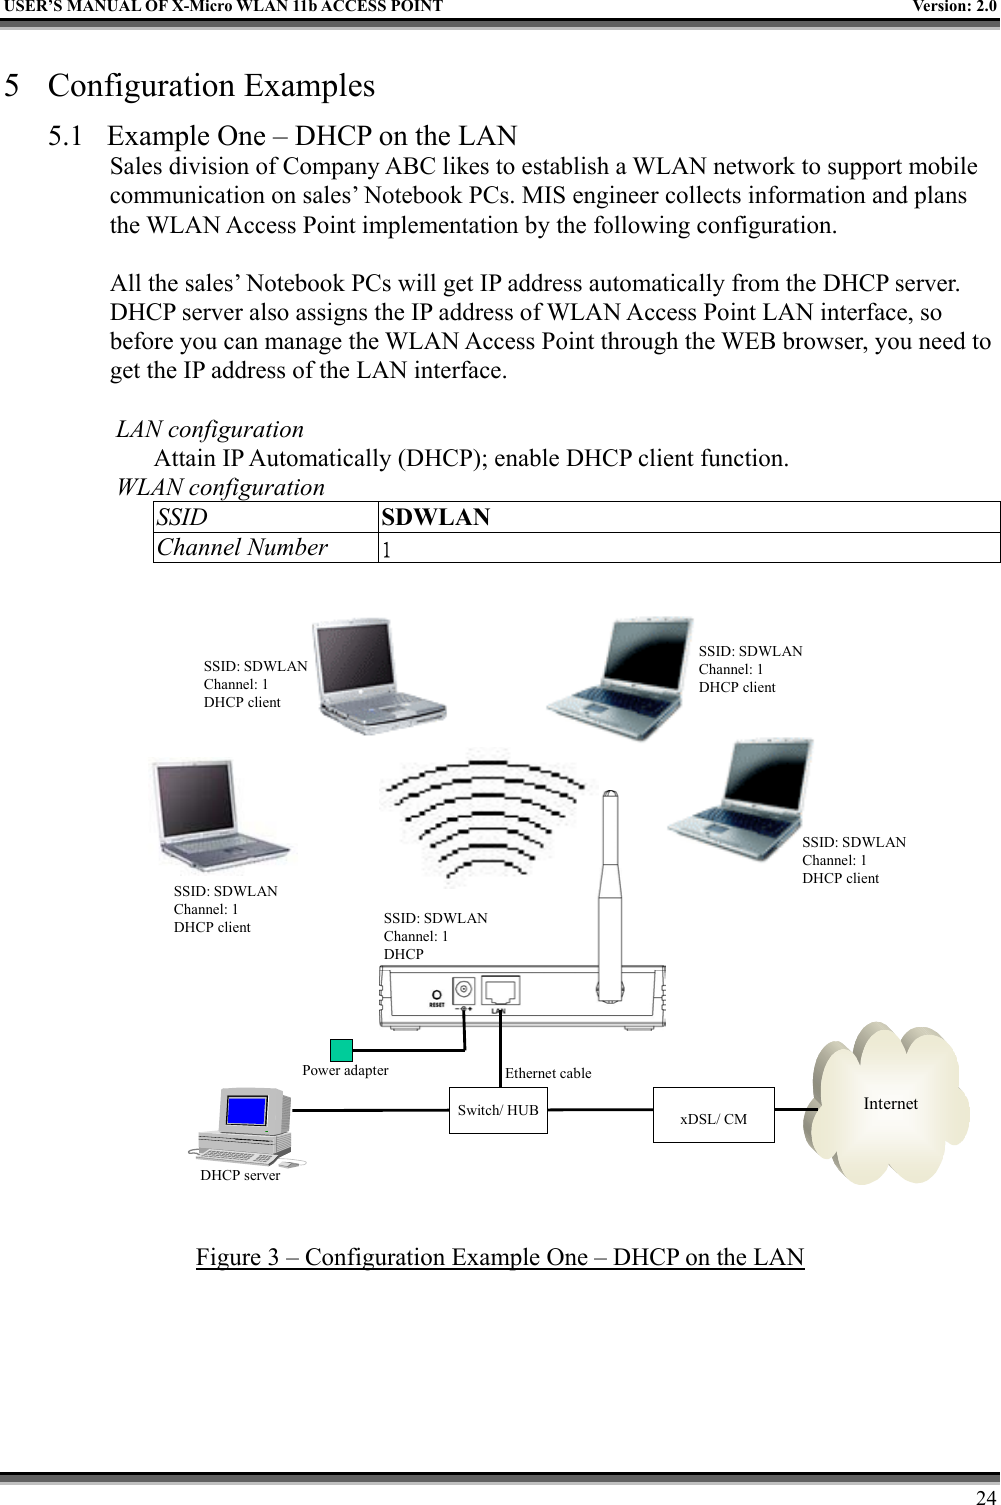   USER’S MANUAL OF X-Micro WLAN 11b ACCESS POINT  Version: 2.0 5 Configuration Examples 5.1  Example One – DHCP on the LAN Sales division of Company ABC likes to establish a WLAN network to support mobile communication on sales’ Notebook PCs. MIS engineer collects information and plans the WLAN Access Point implementation by the following configuration.  All the sales’ Notebook PCs will get IP address automatically from the DHCP server. DHCP server also assigns the IP address of WLAN Access Point LAN interface, so before you can manage the WLAN Access Point through the WEB browser, you need to get the IP address of the LAN interface.  LAN configuration Attain IP Automatically (DHCP); enable DHCP client function. WLAN configuration SSID  SDWLAN Channel Number  1 InternetxDSL/ CMPower adapter Ethernet cableSSID: SDWLANChannel: 1 DHCP clientSSID: SDWLANChannel: 1 DHCP clientSSID: SDWLANChannel: 1 DHCP clientSSID: SDWLANChannel: 1 DHCP client SSID: SDWLANChannel: 1DHCPDHCP serverSwitch/ HUB Figure 3 – Configuration Example One – DHCP on the LAN     24 